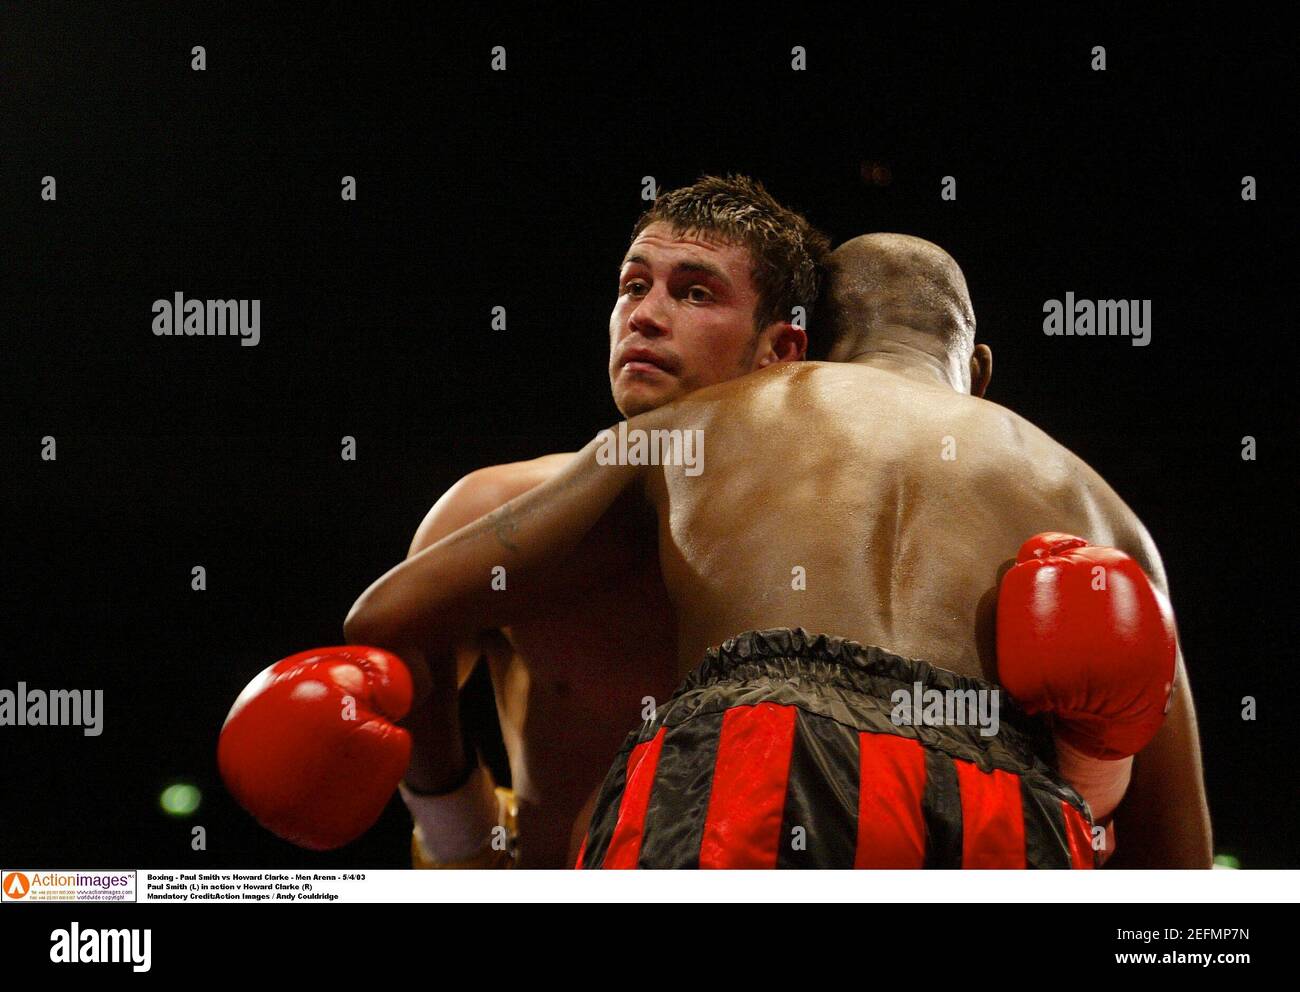 Boxing - Paul Smith vs Howard Clarke - Men Arena - 5/4/03 Paul Smith (L) in  action v Howard Clarke (R) Mandatory Credit:Action Images / Andy Couldridge  Stock Photo - Alamy